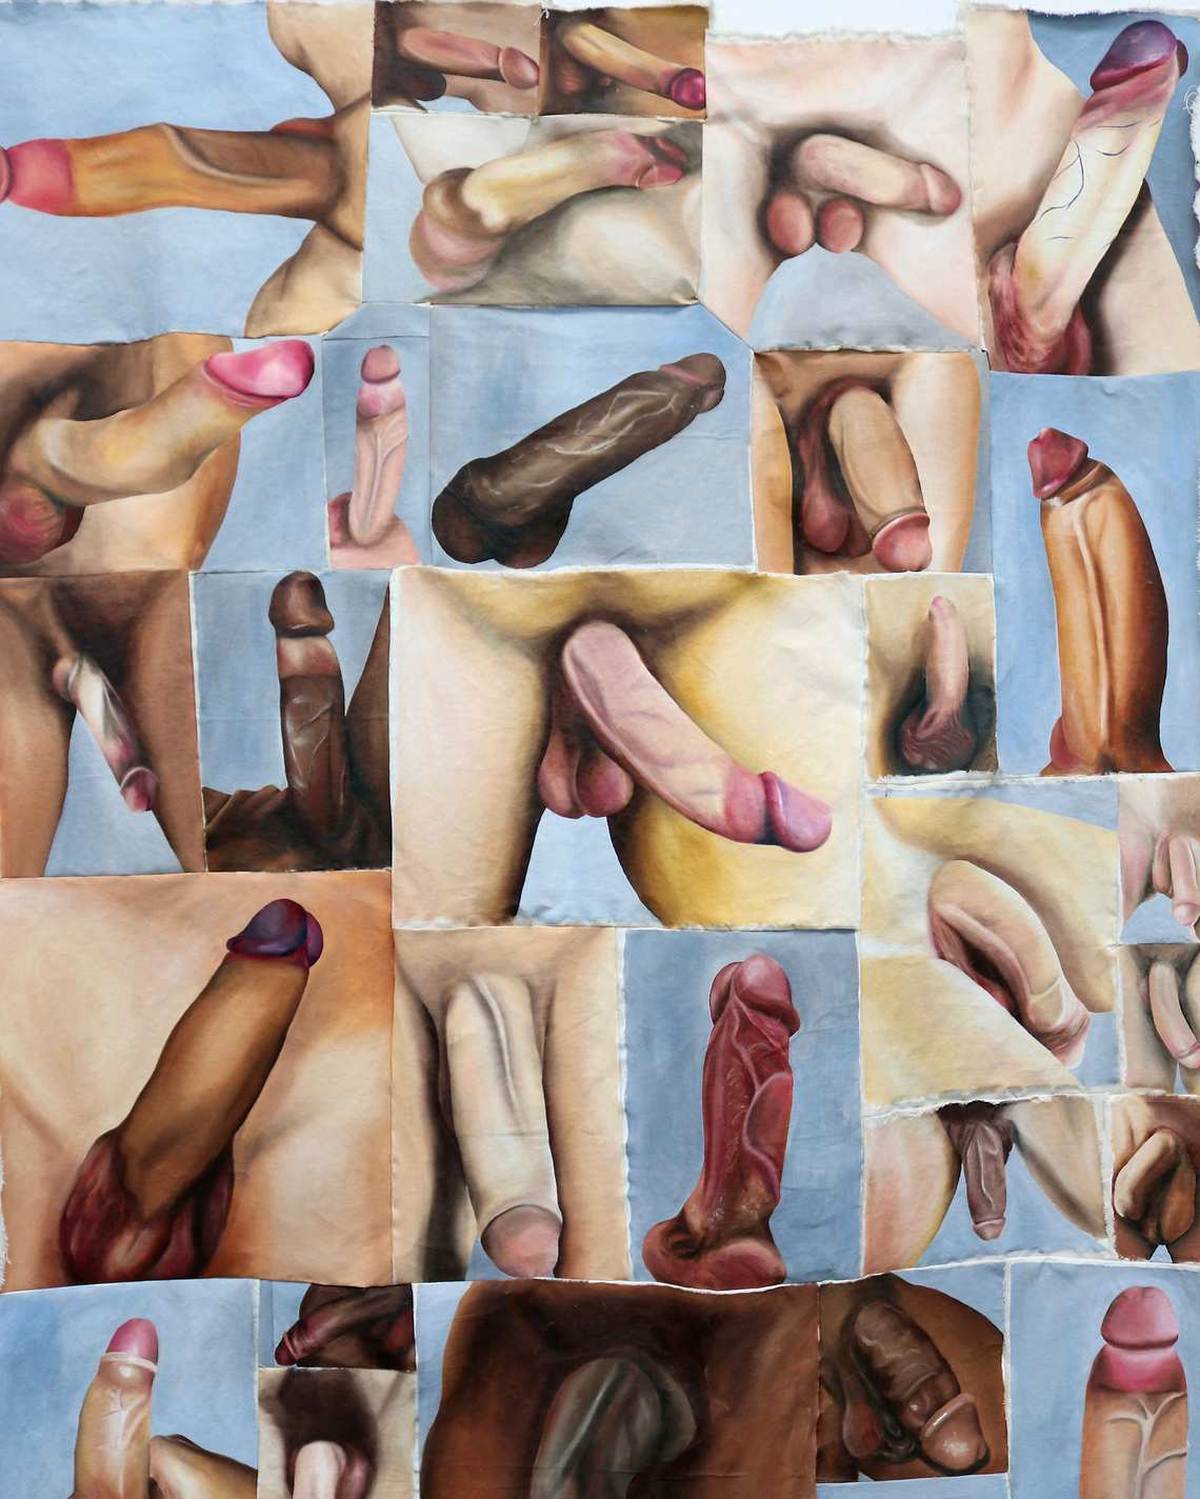 300 dick pic art project